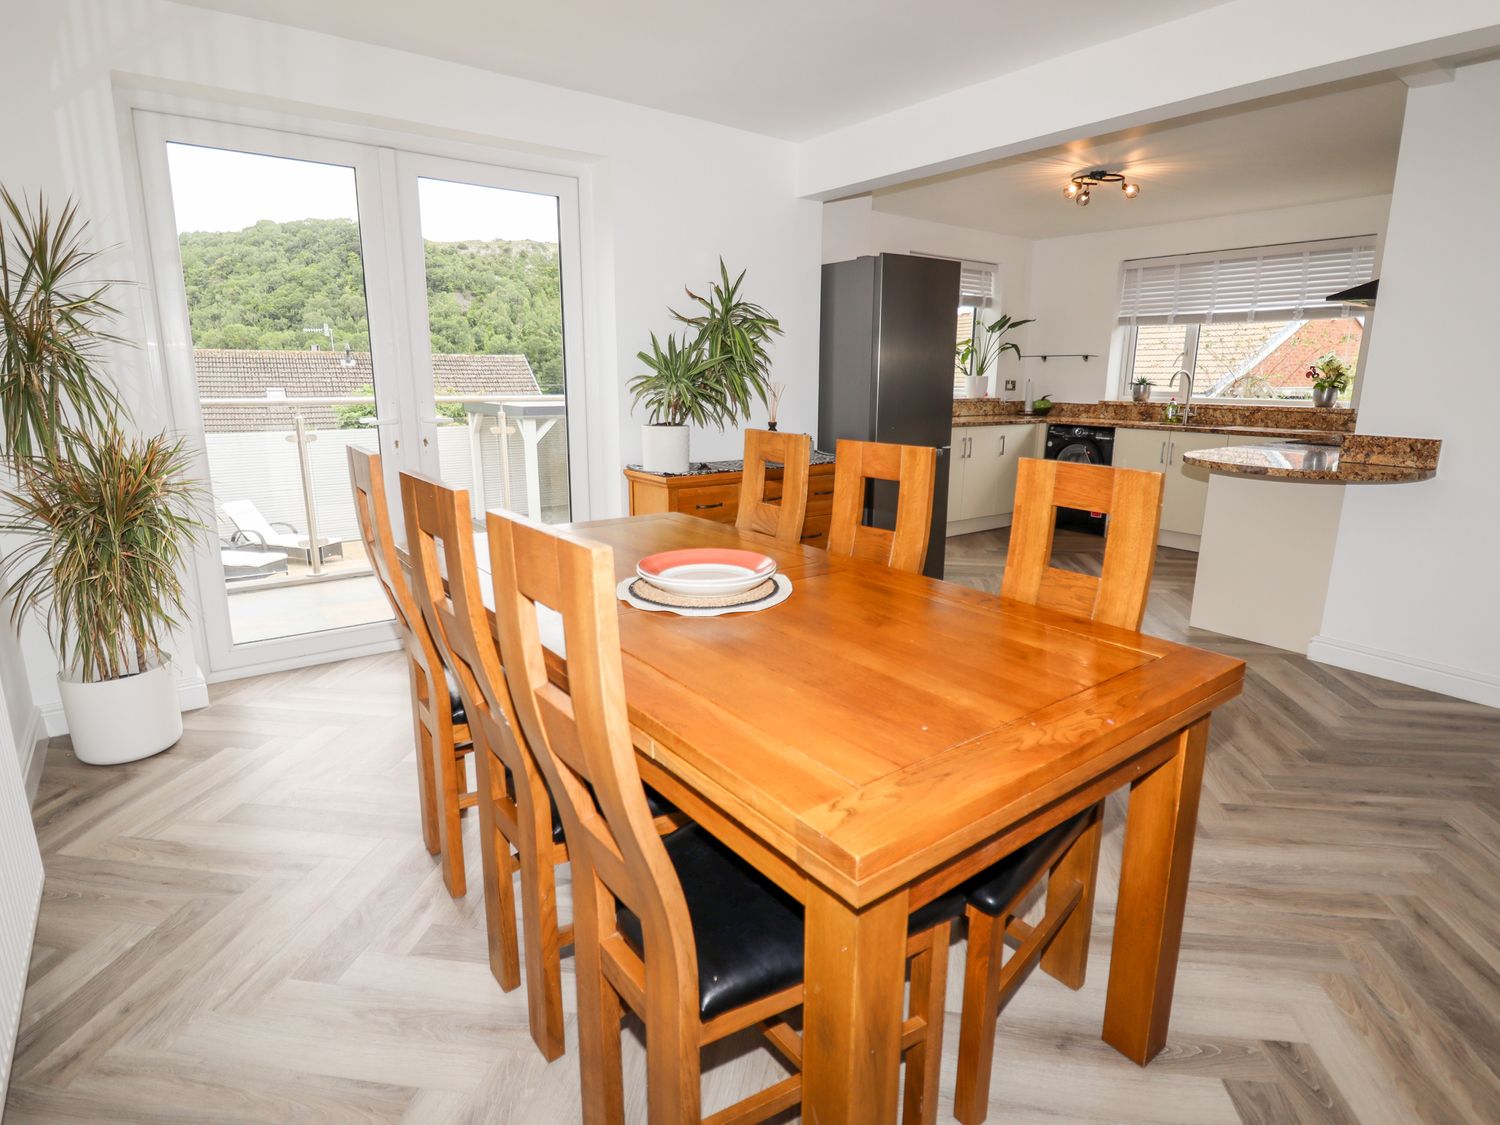 4 Bodnant Road, Rhos-On-Sea, Conwy. Close to a shop, a pub and a beach. Off-road parking. Pets. WiFi